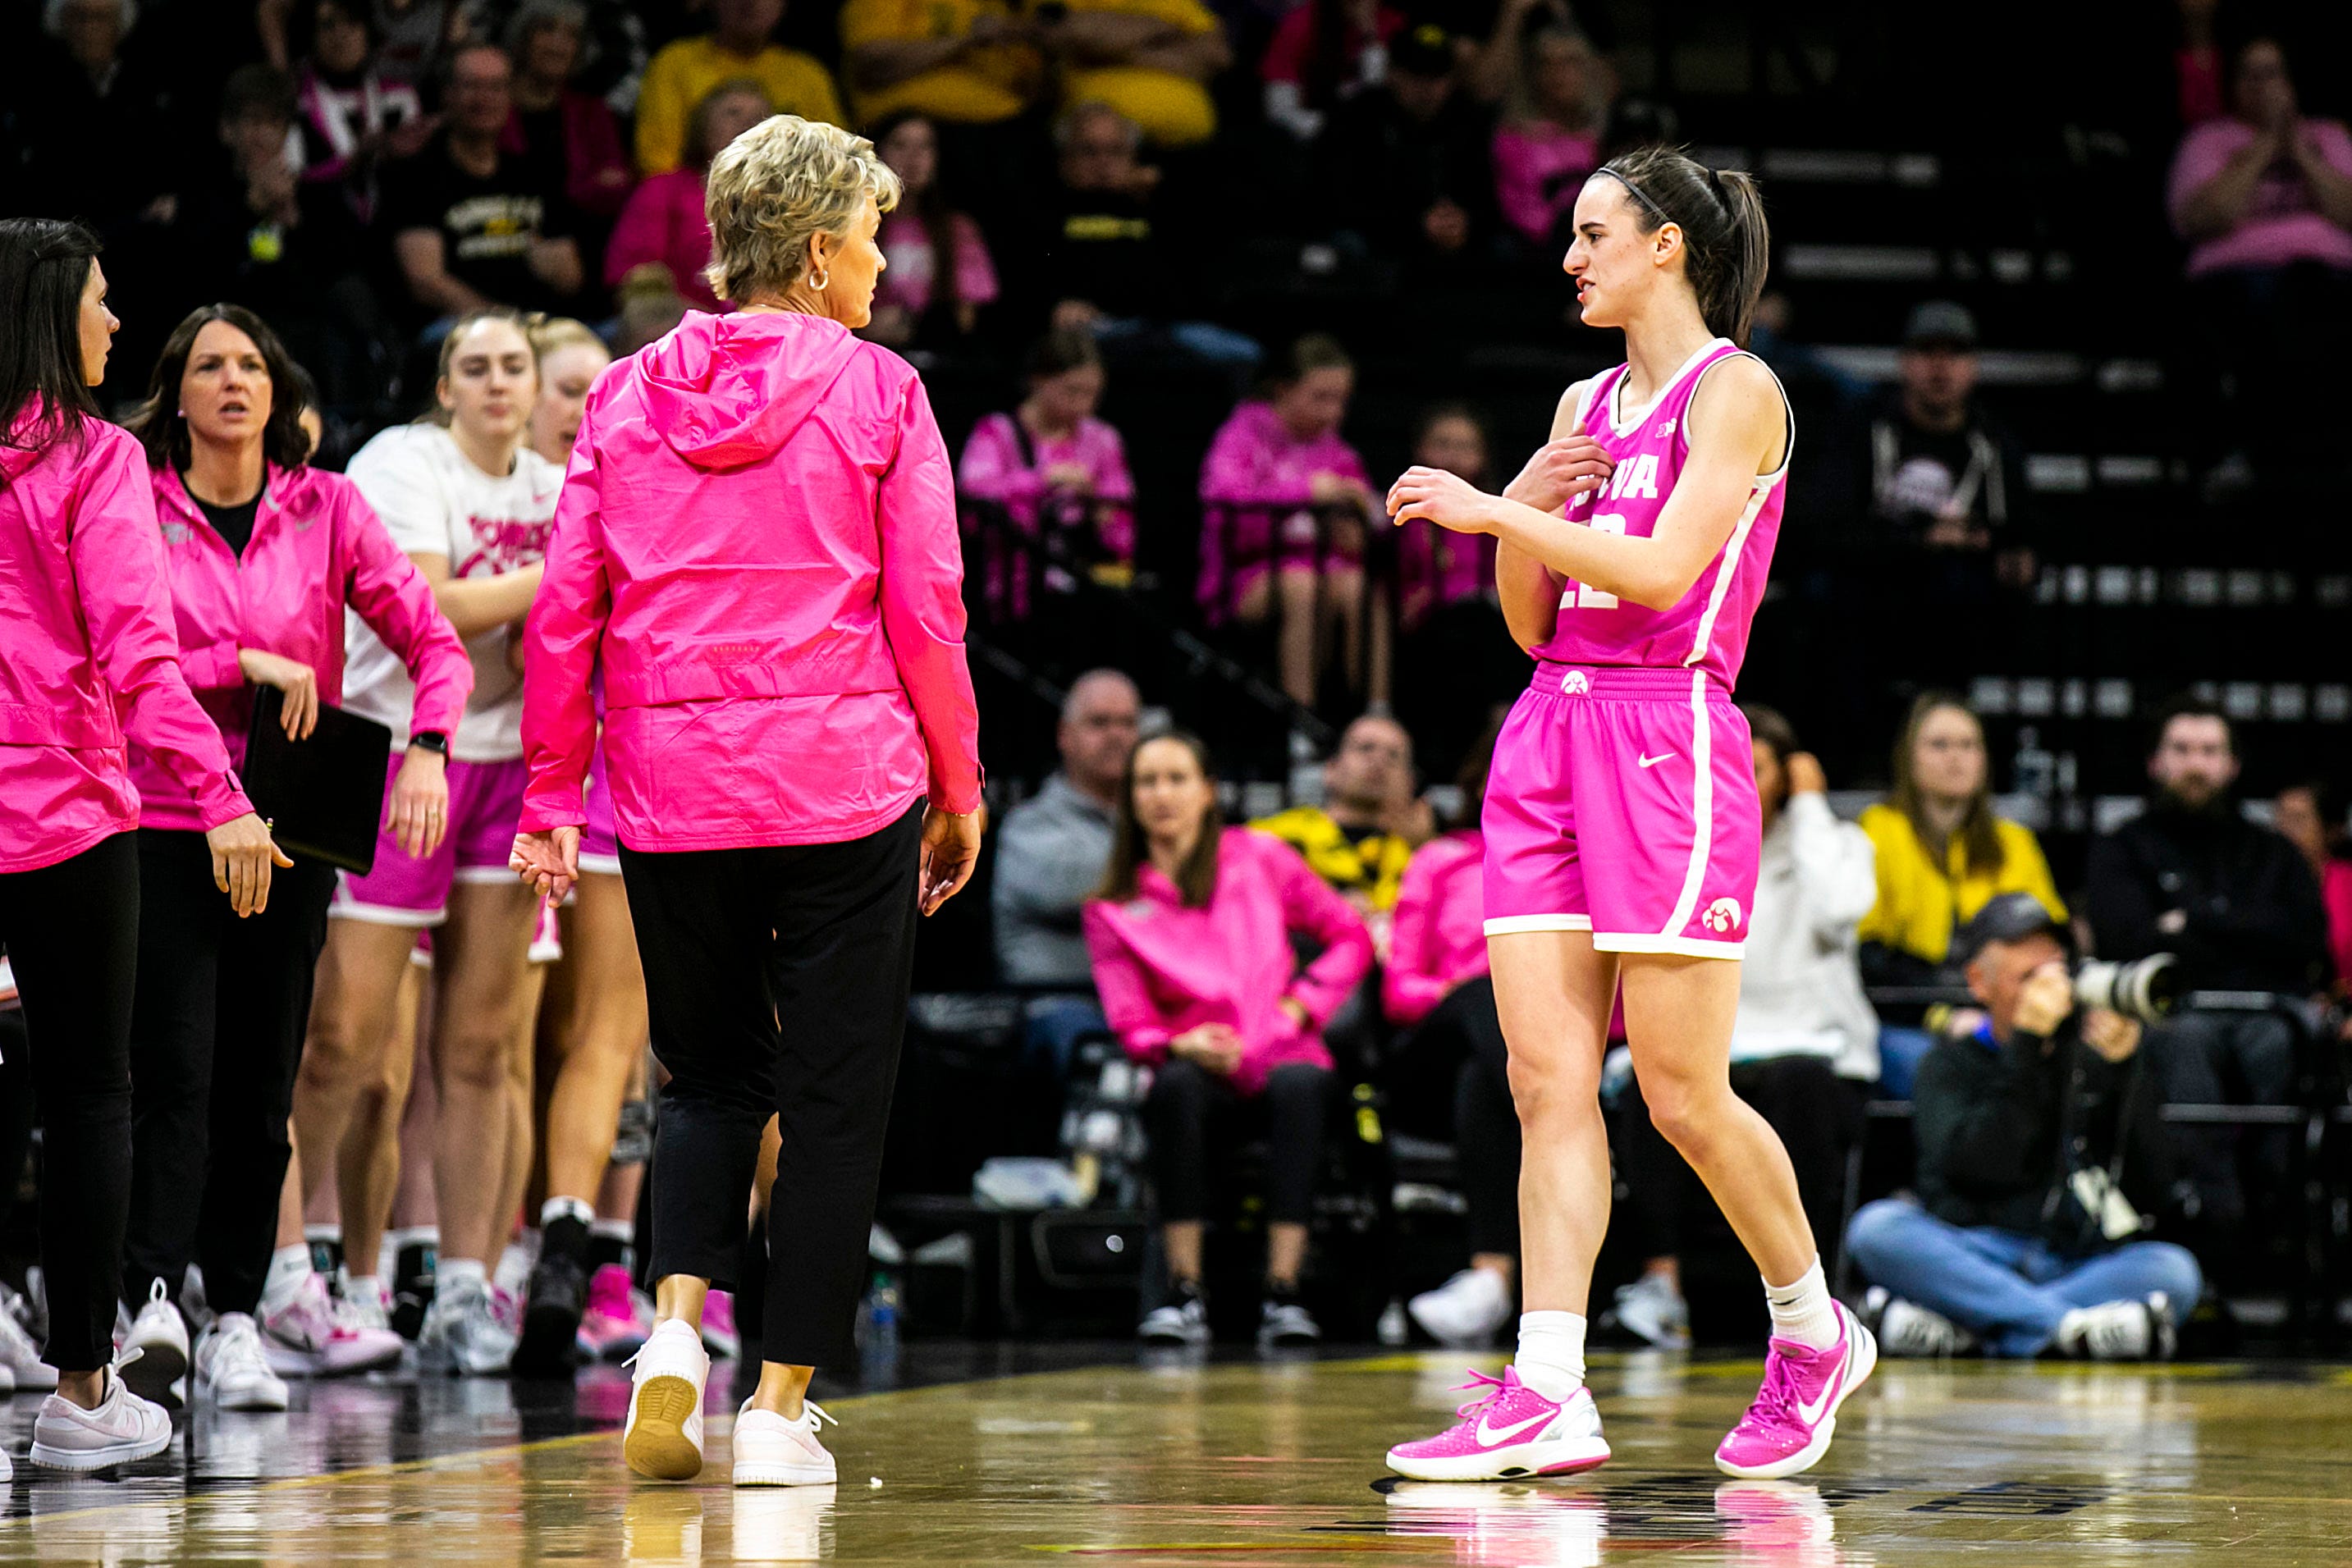 Iowa guard Caitlin Clark, right, talks with head coach Lisa Bluder during a NCAA Big Ten Conference women's basketball game against Rutgers, Sunday, Feb. 12, 2023, at Carver-Hawkeye Arena in Iowa City, Iowa.